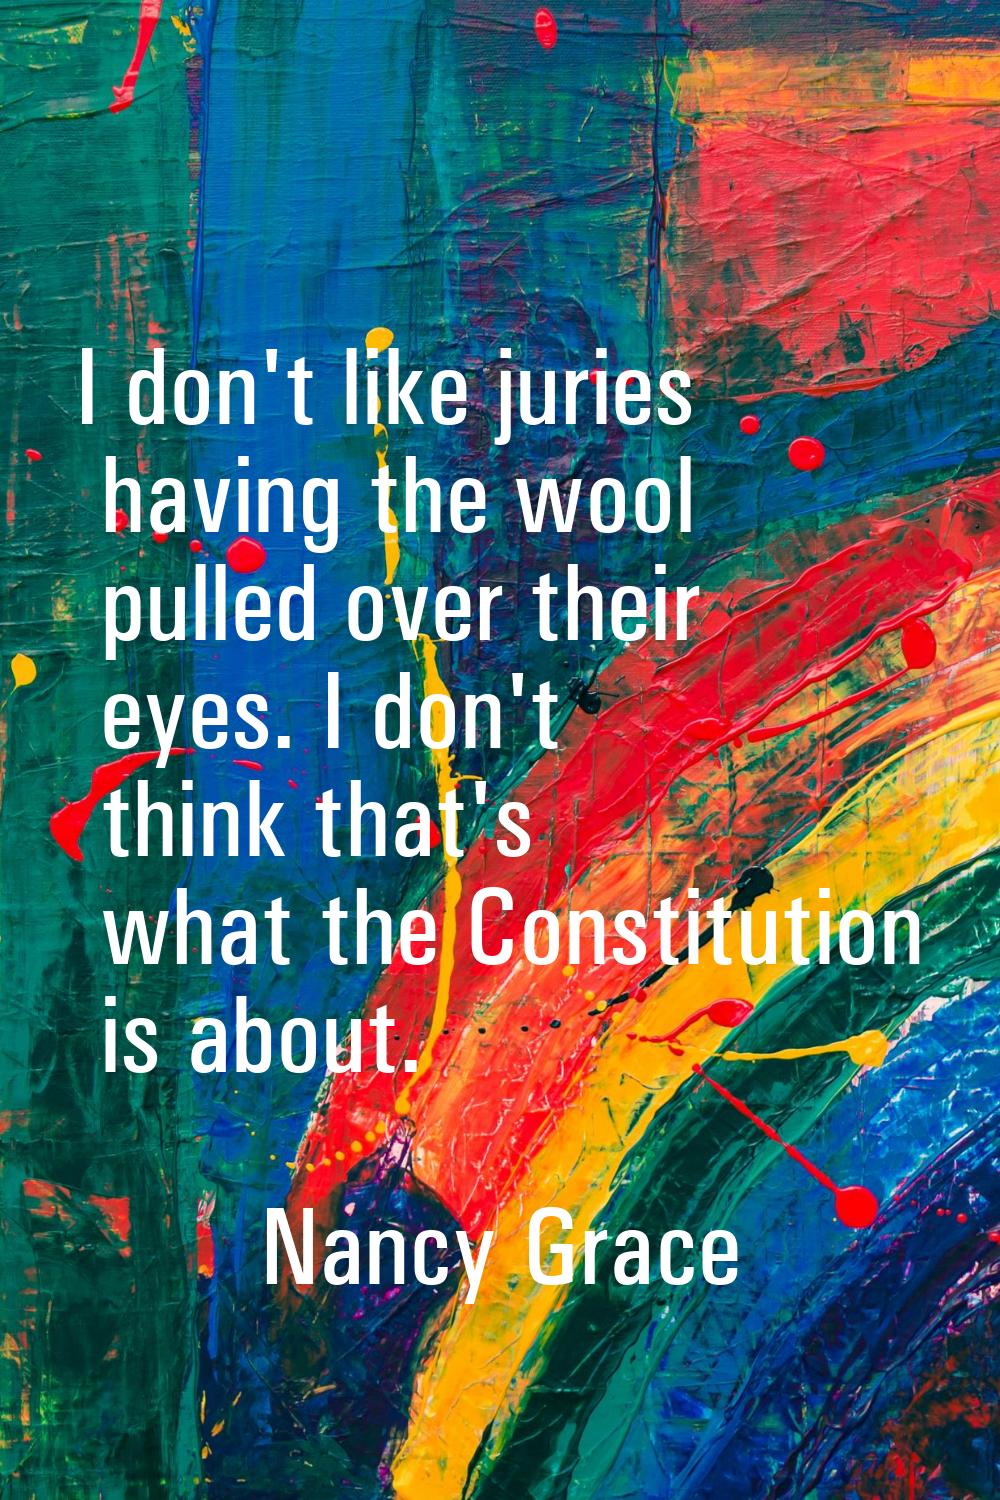 I don't like juries having the wool pulled over their eyes. I don't think that's what the Constitut